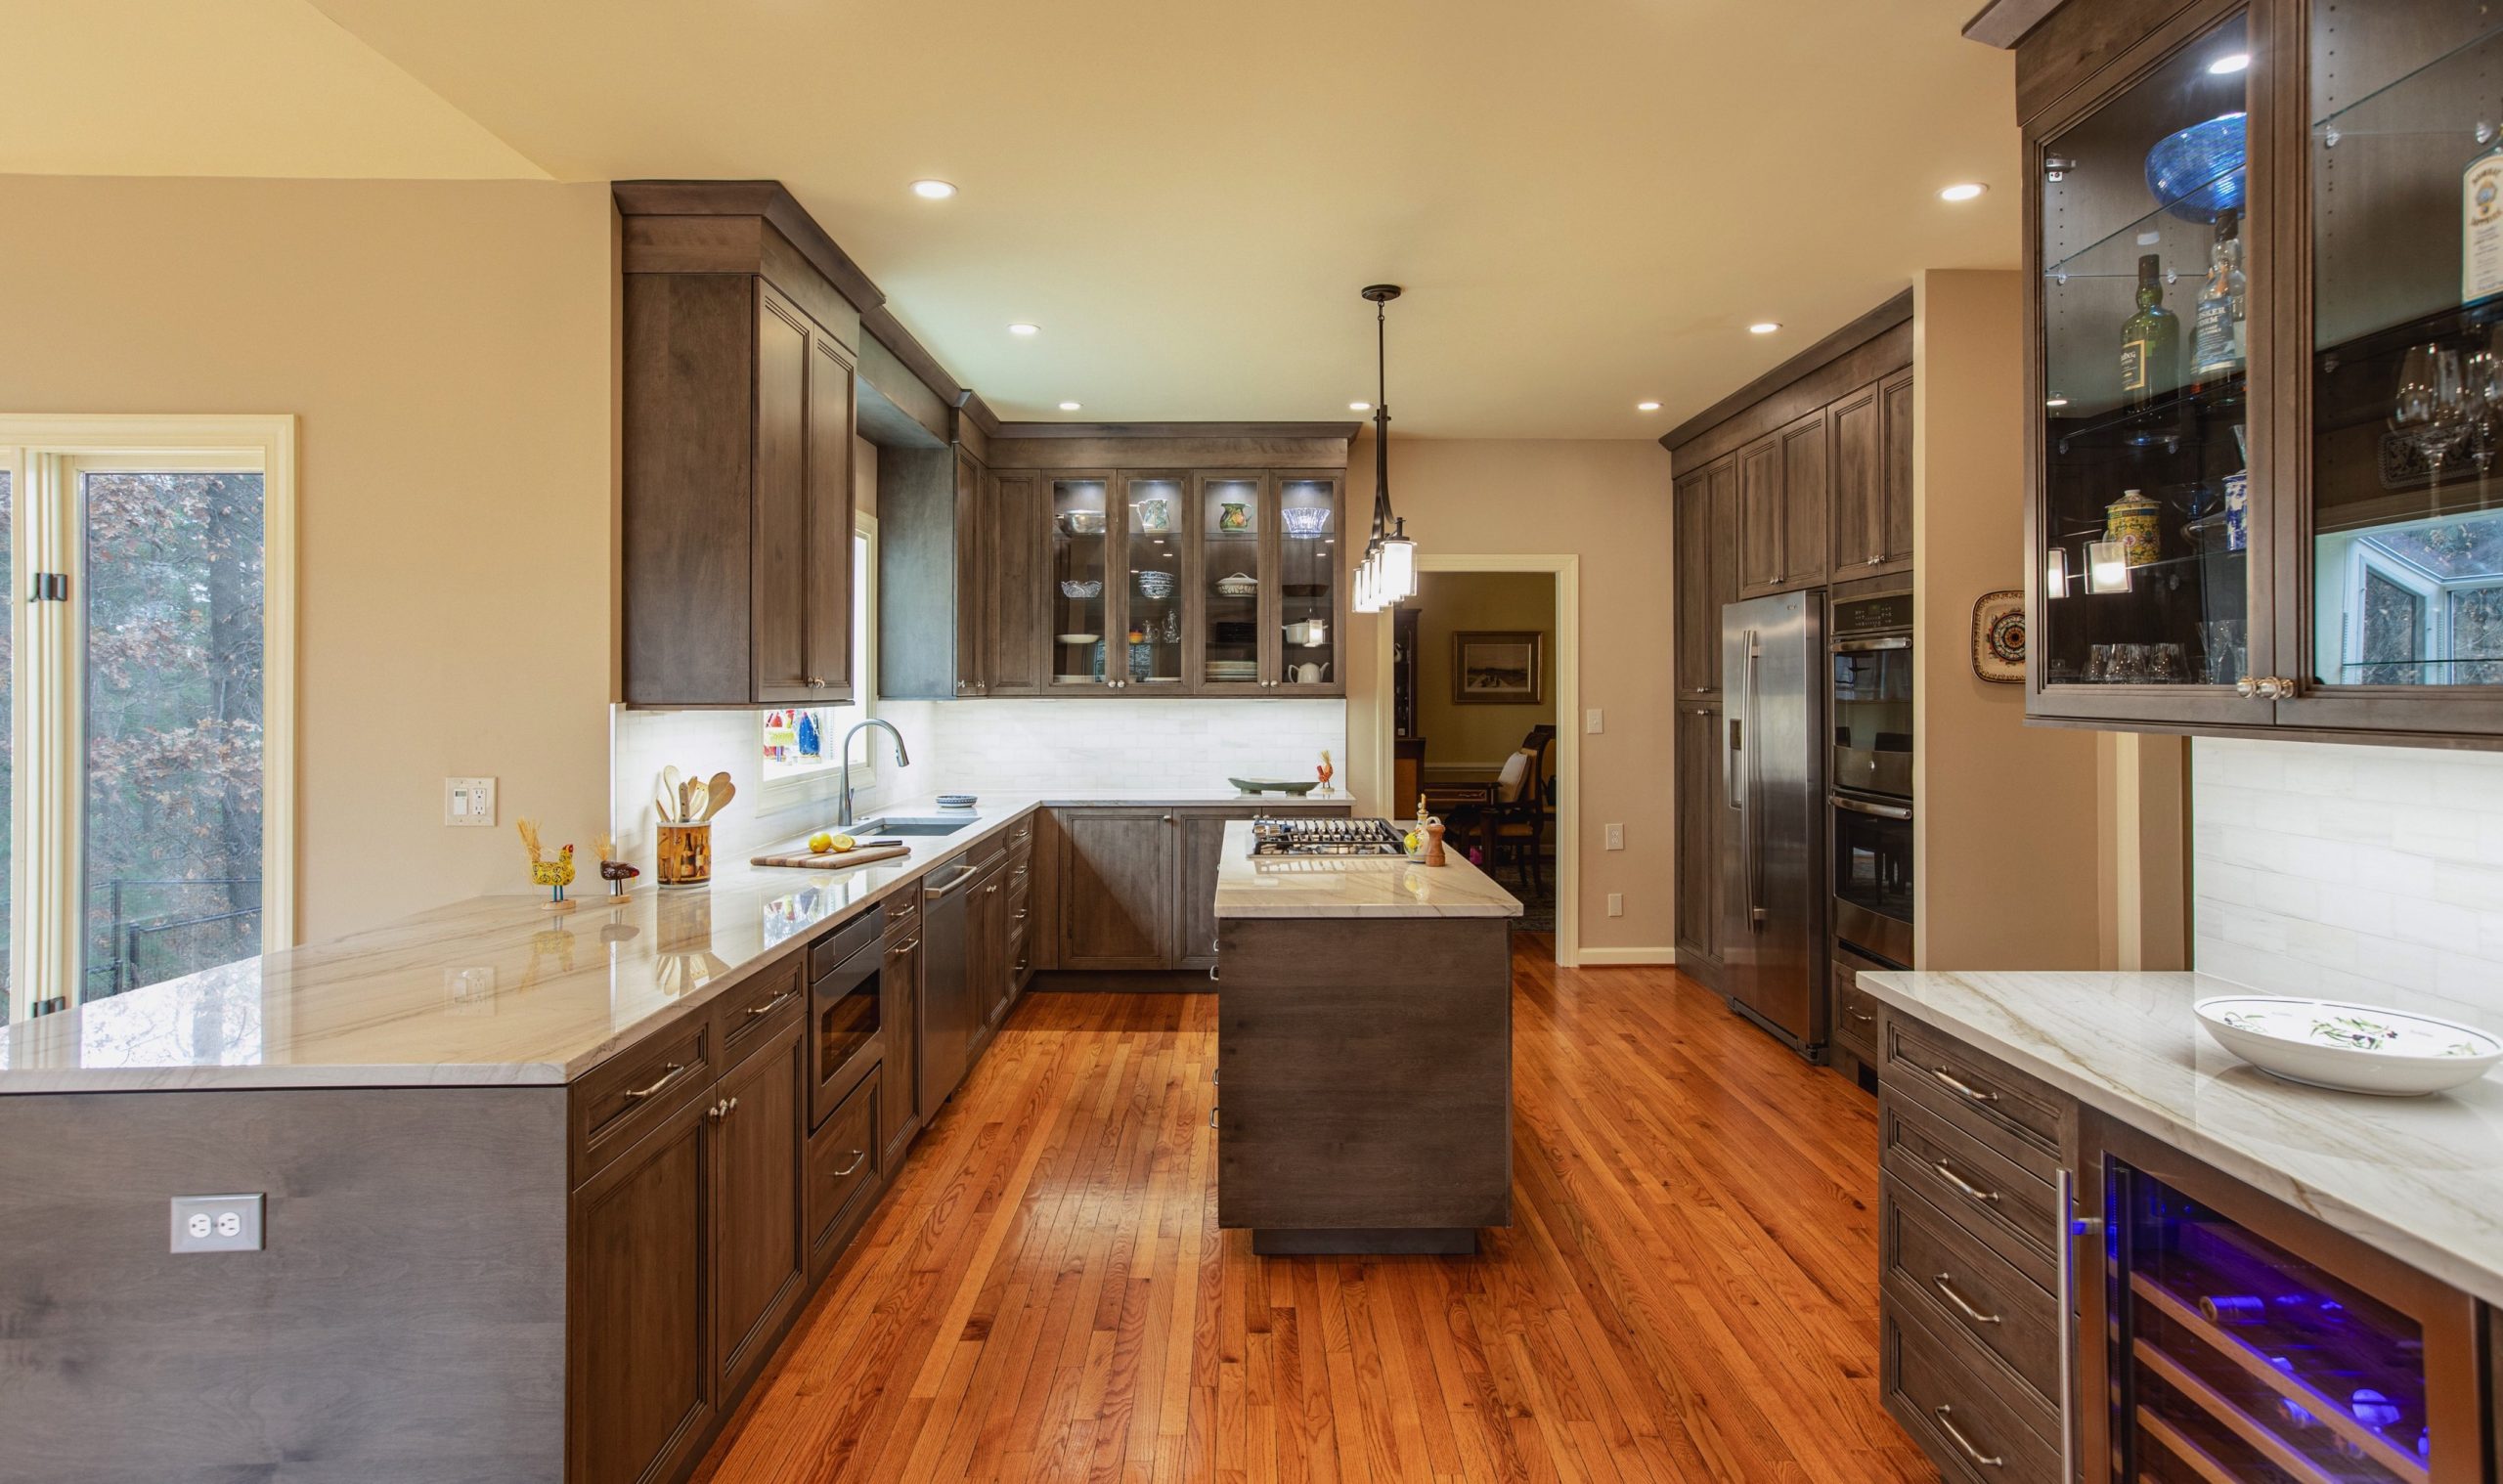 A kitchen with a spacious island and wooden floors